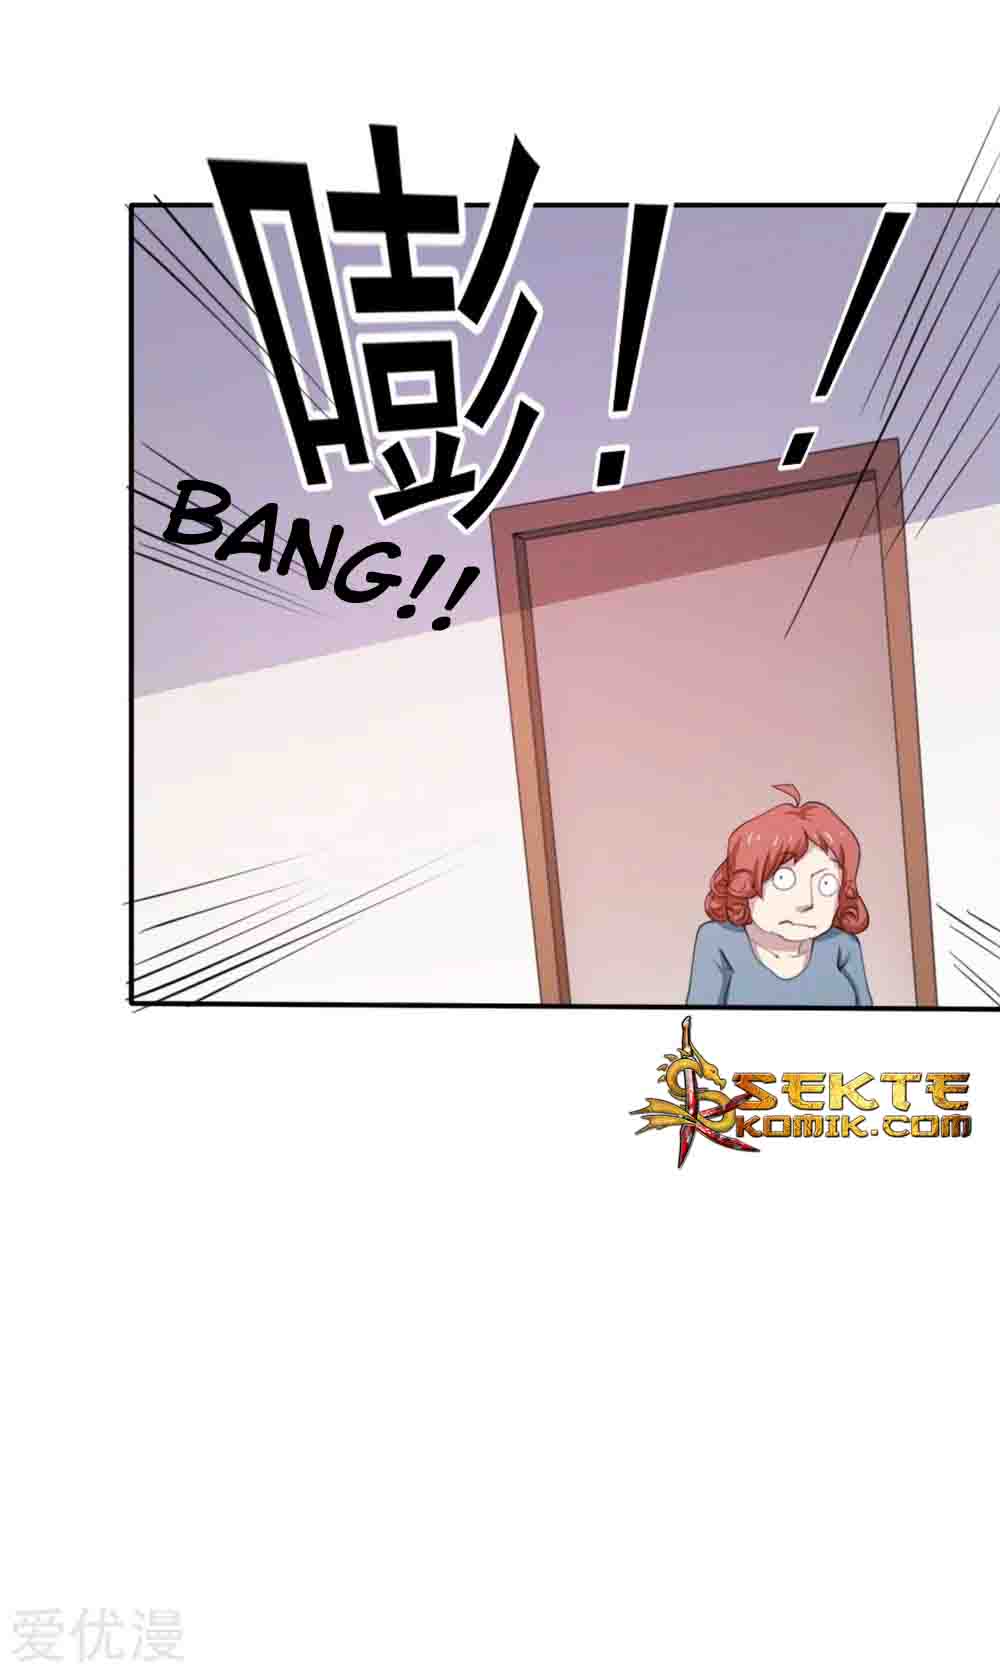 Godly Mobile Game Chapter 01